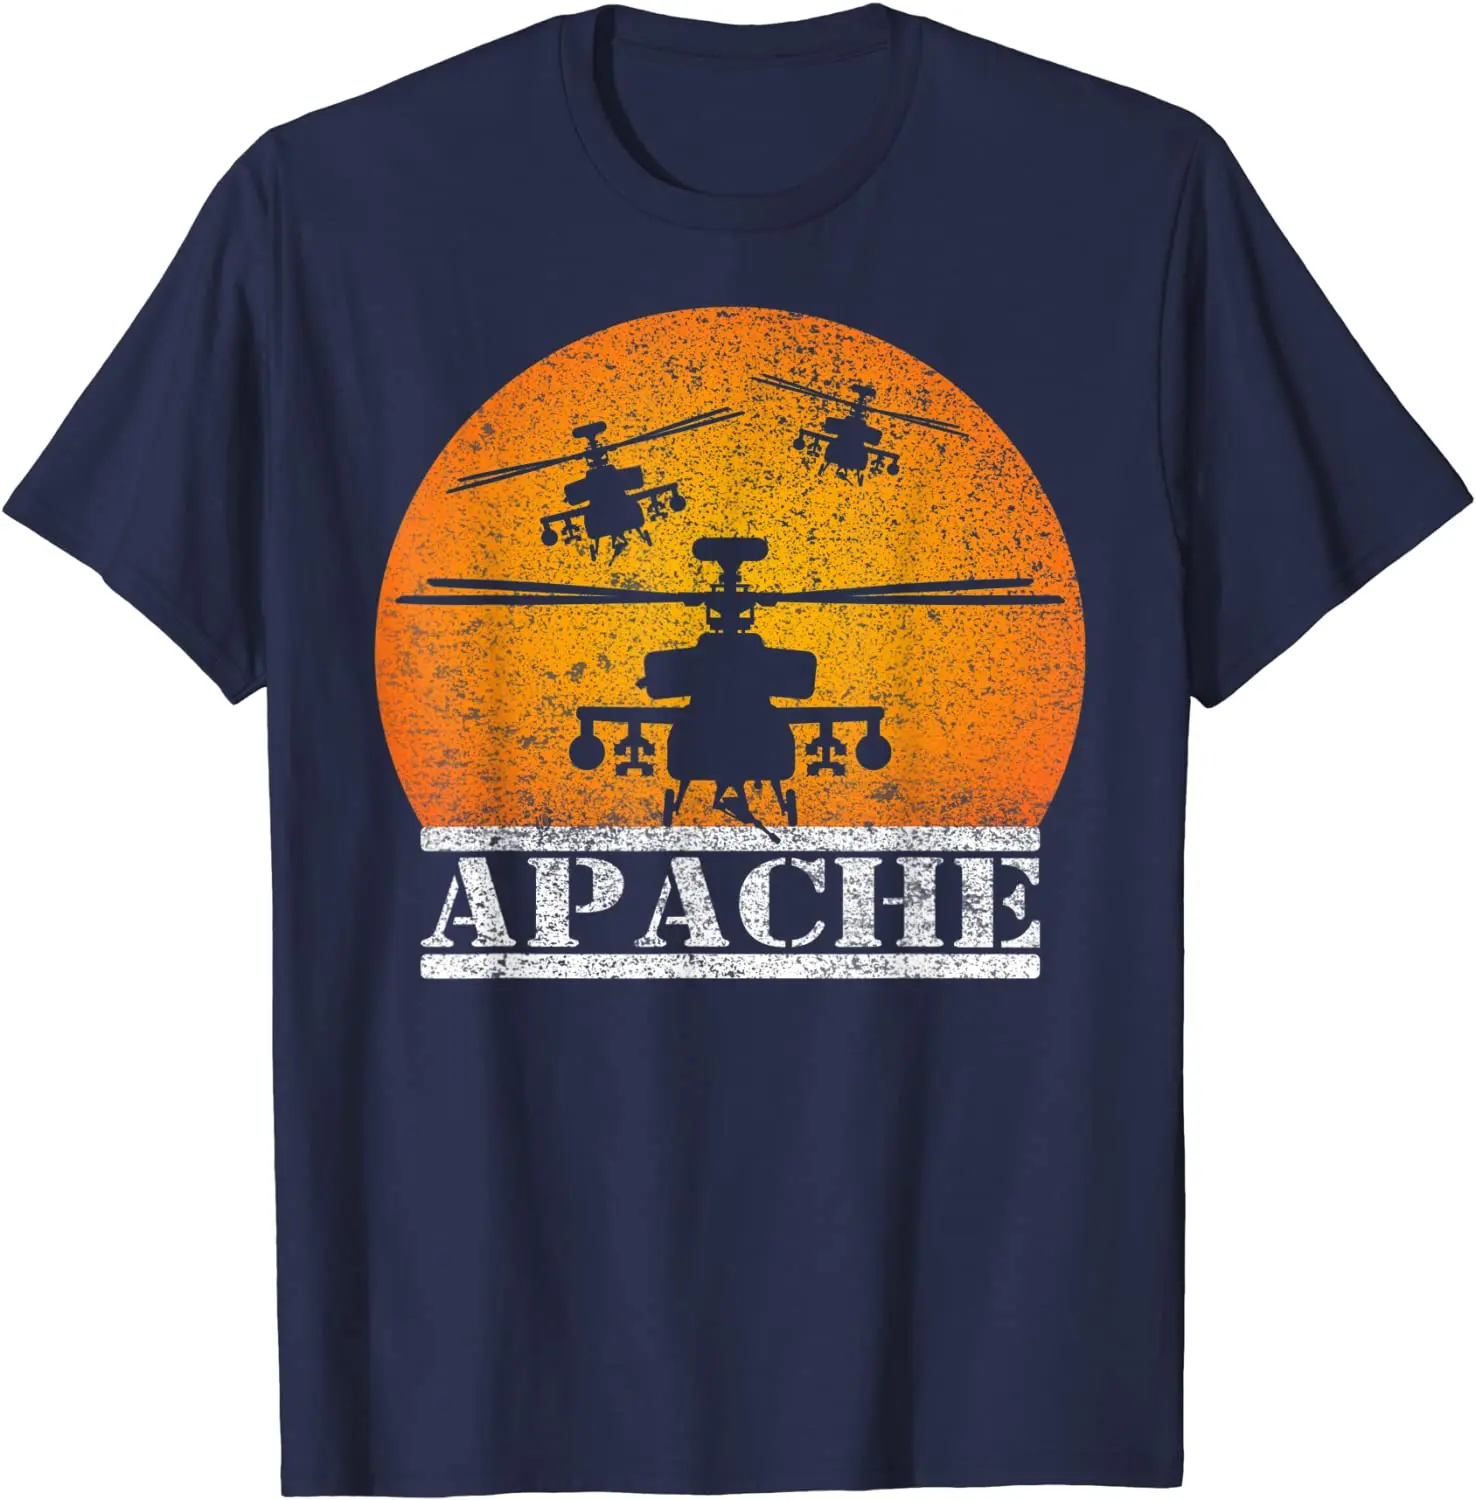 family thanksgiving outfits AH64 Apache Attack Helicopters T-Shirt. Summer Cotton Short Sleeve O-Neck Mens T Shirt New S-3XL plus size matching family outfits Family Matching Outfits